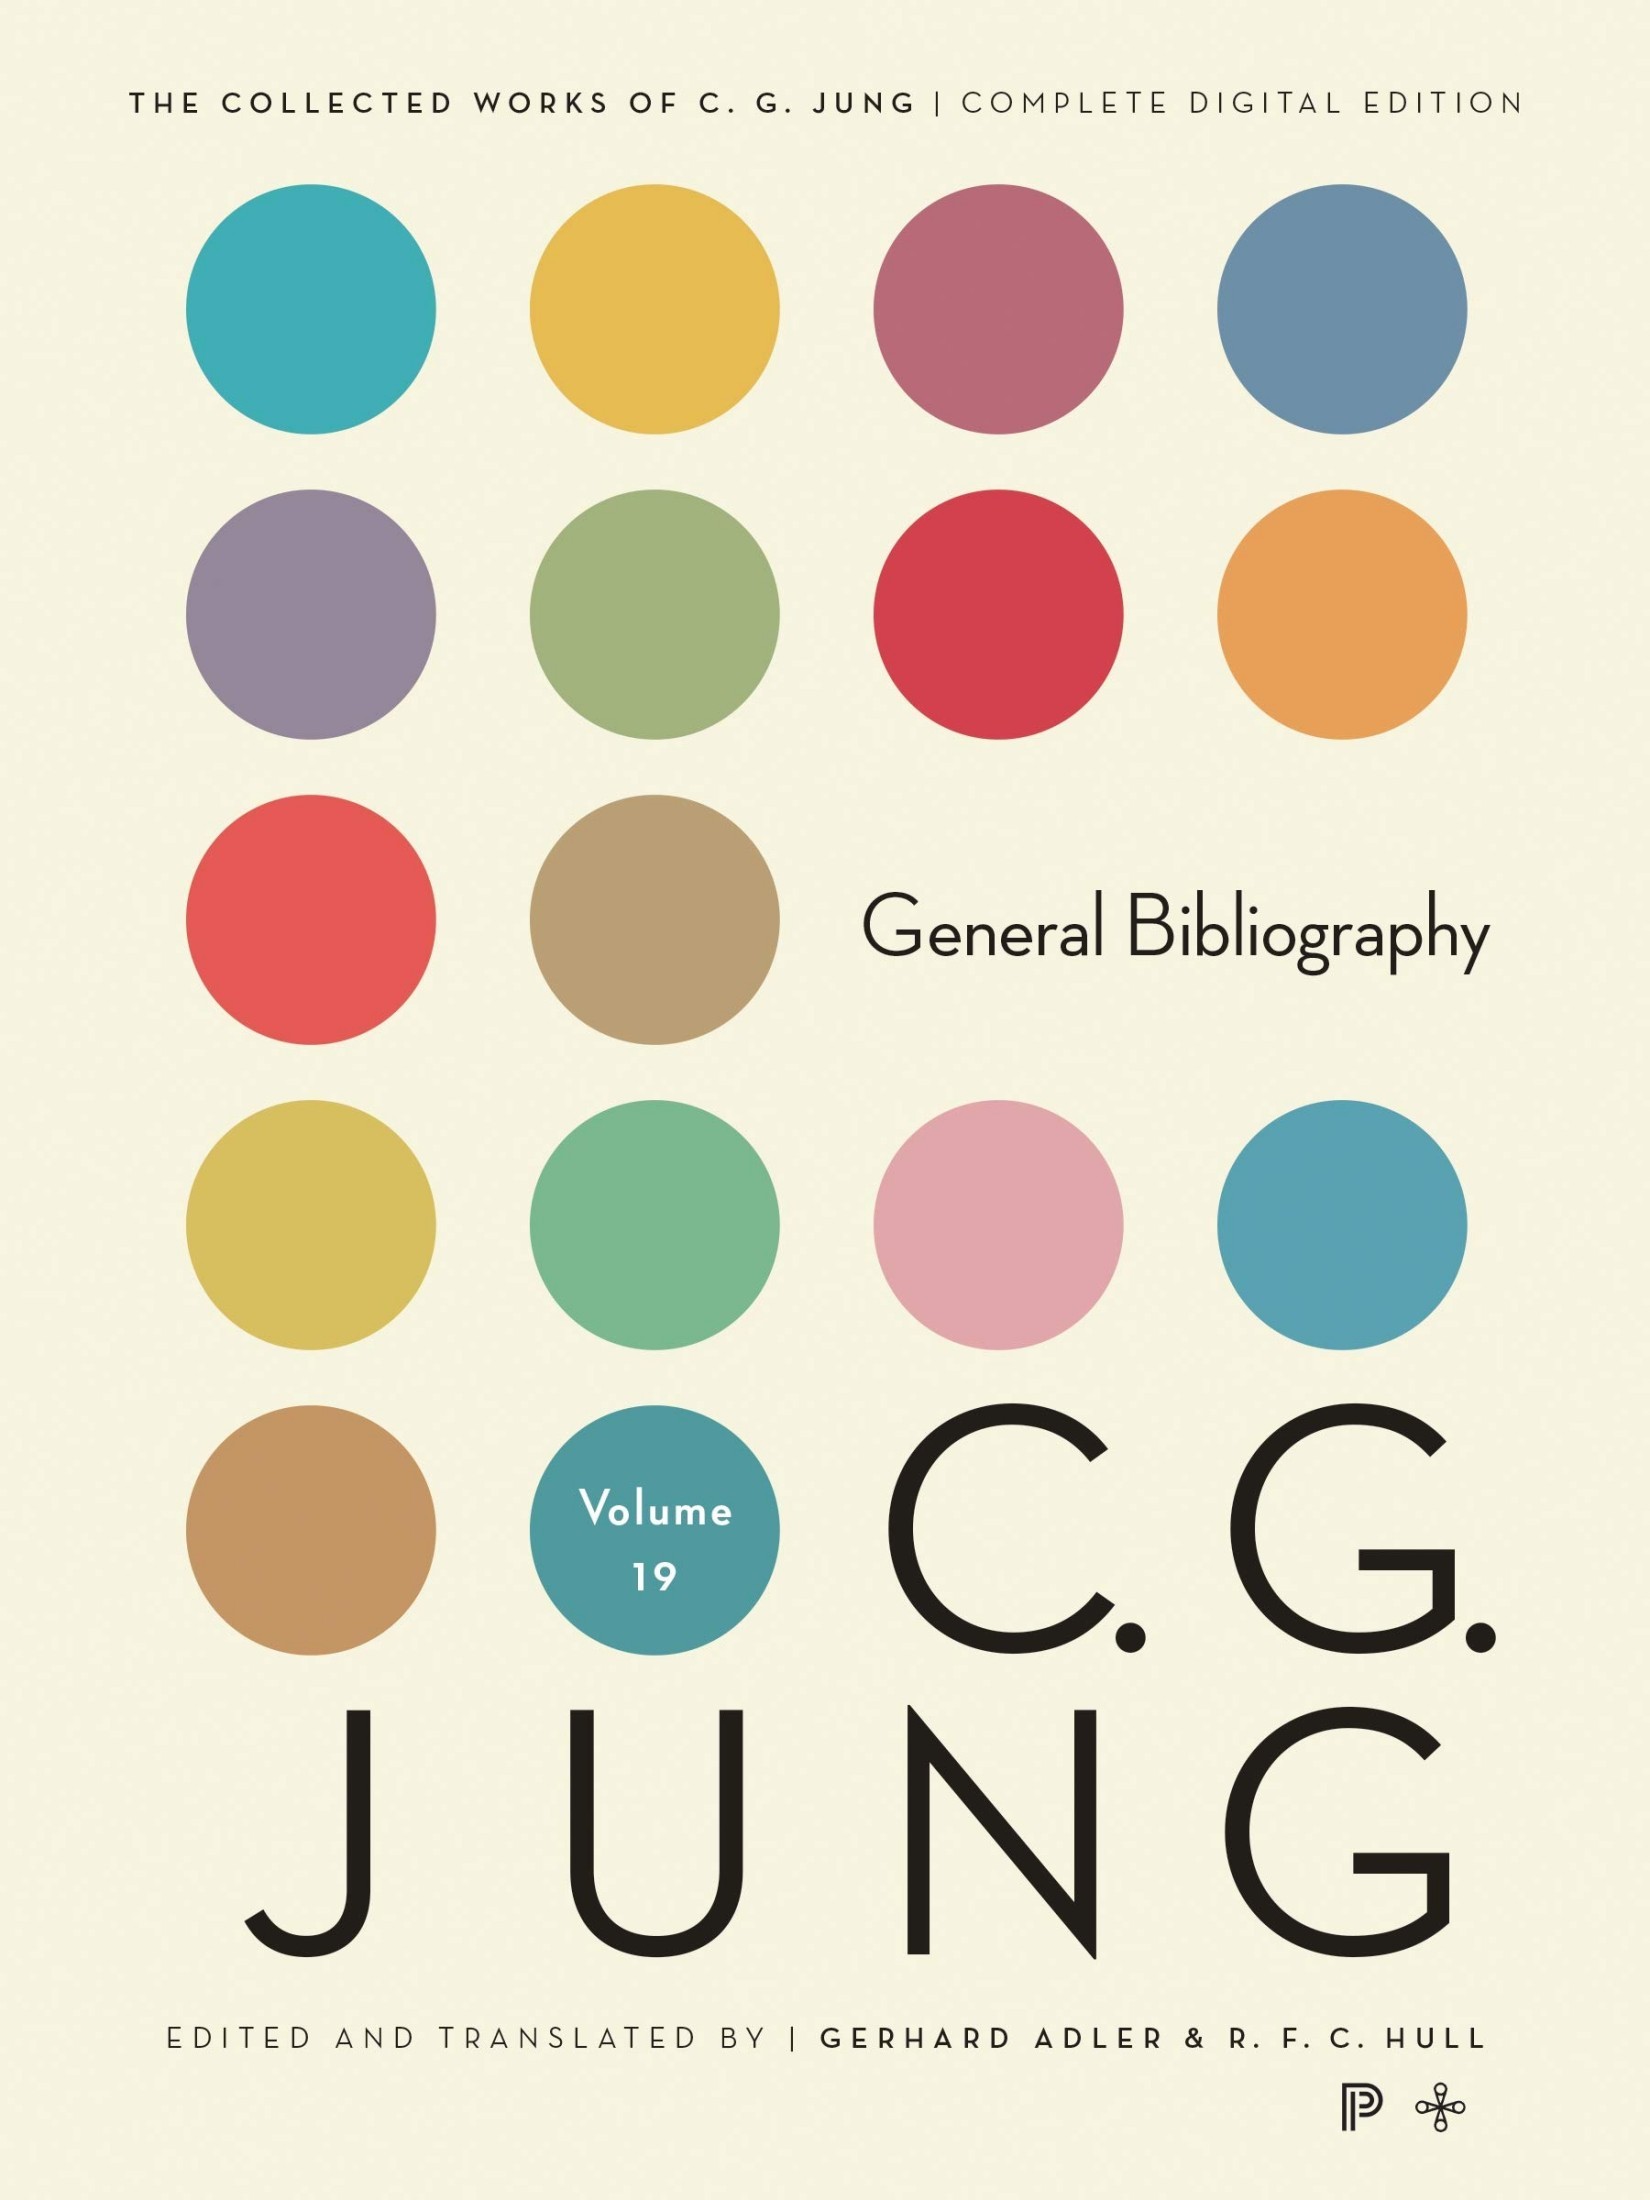 Collected Works of C.G. Jung, Volume 19: General Bibliography - Revised Edition